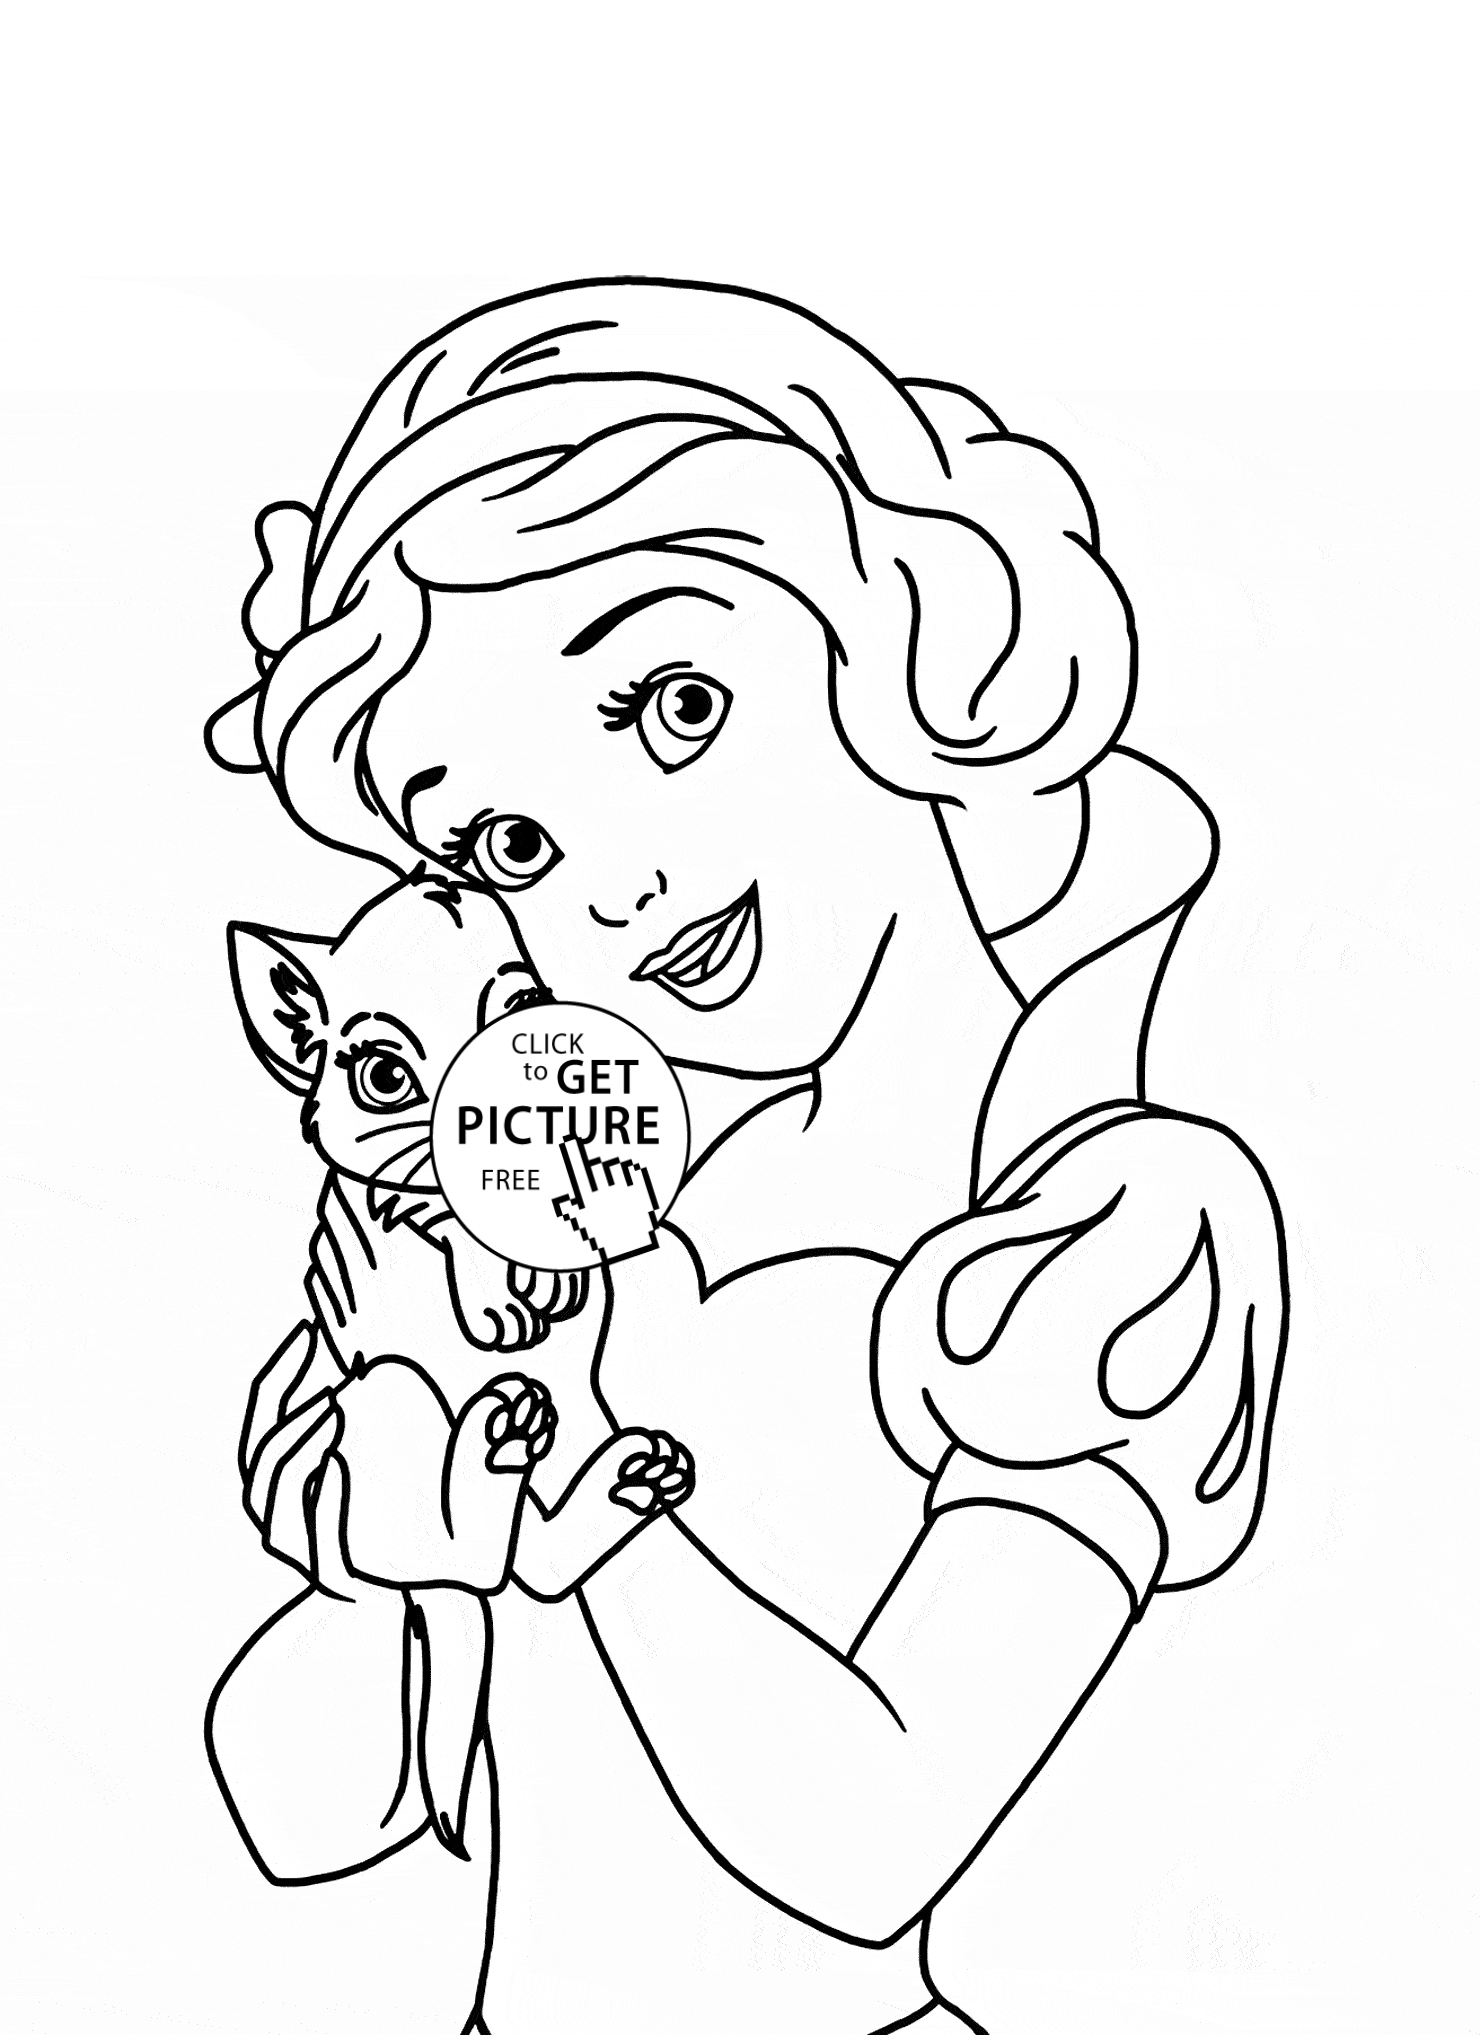 stress-coloring-pages-for-kids-coloring